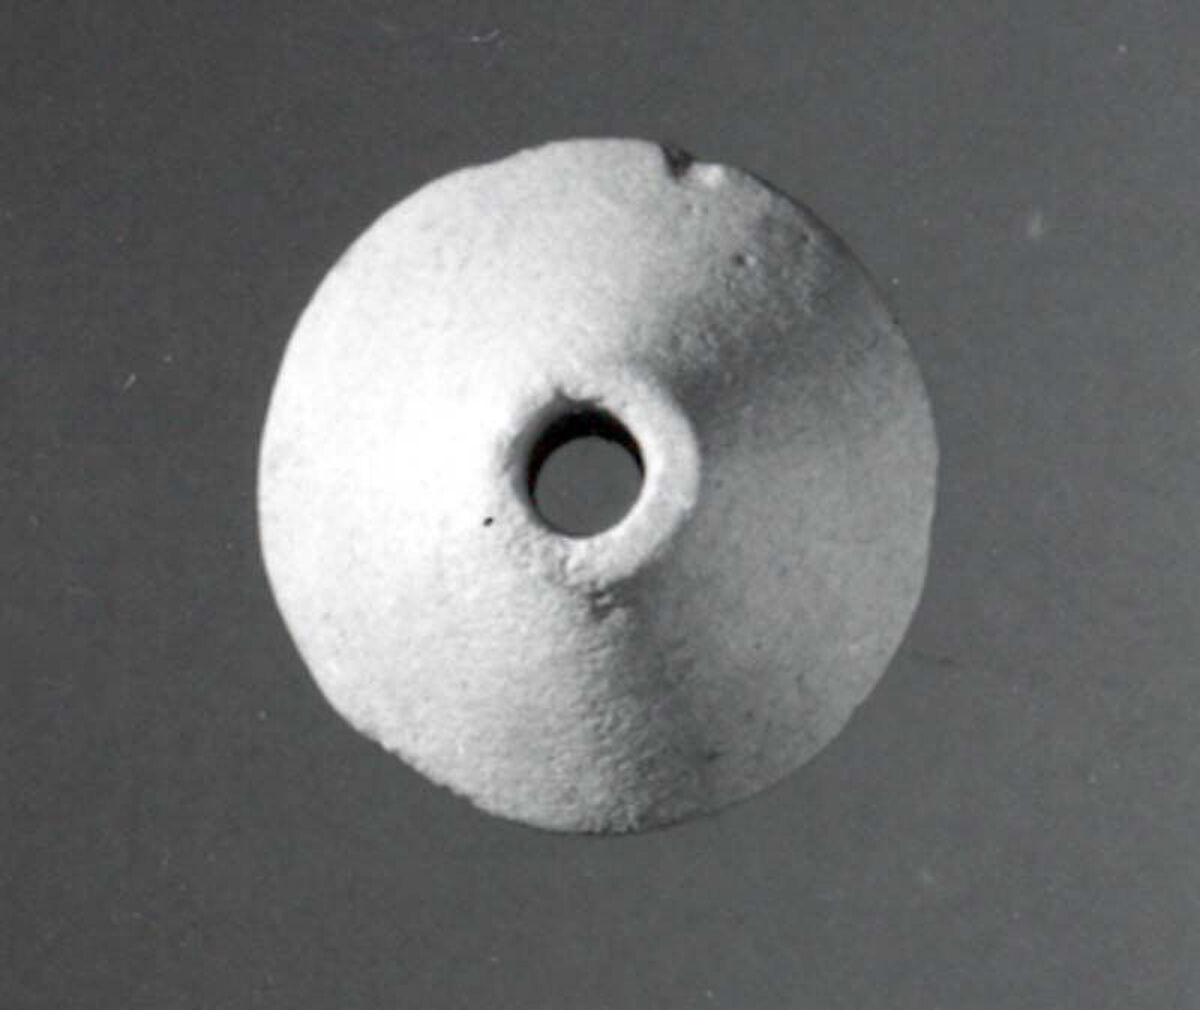 Bead or spindle whorl, Stone, Iran 